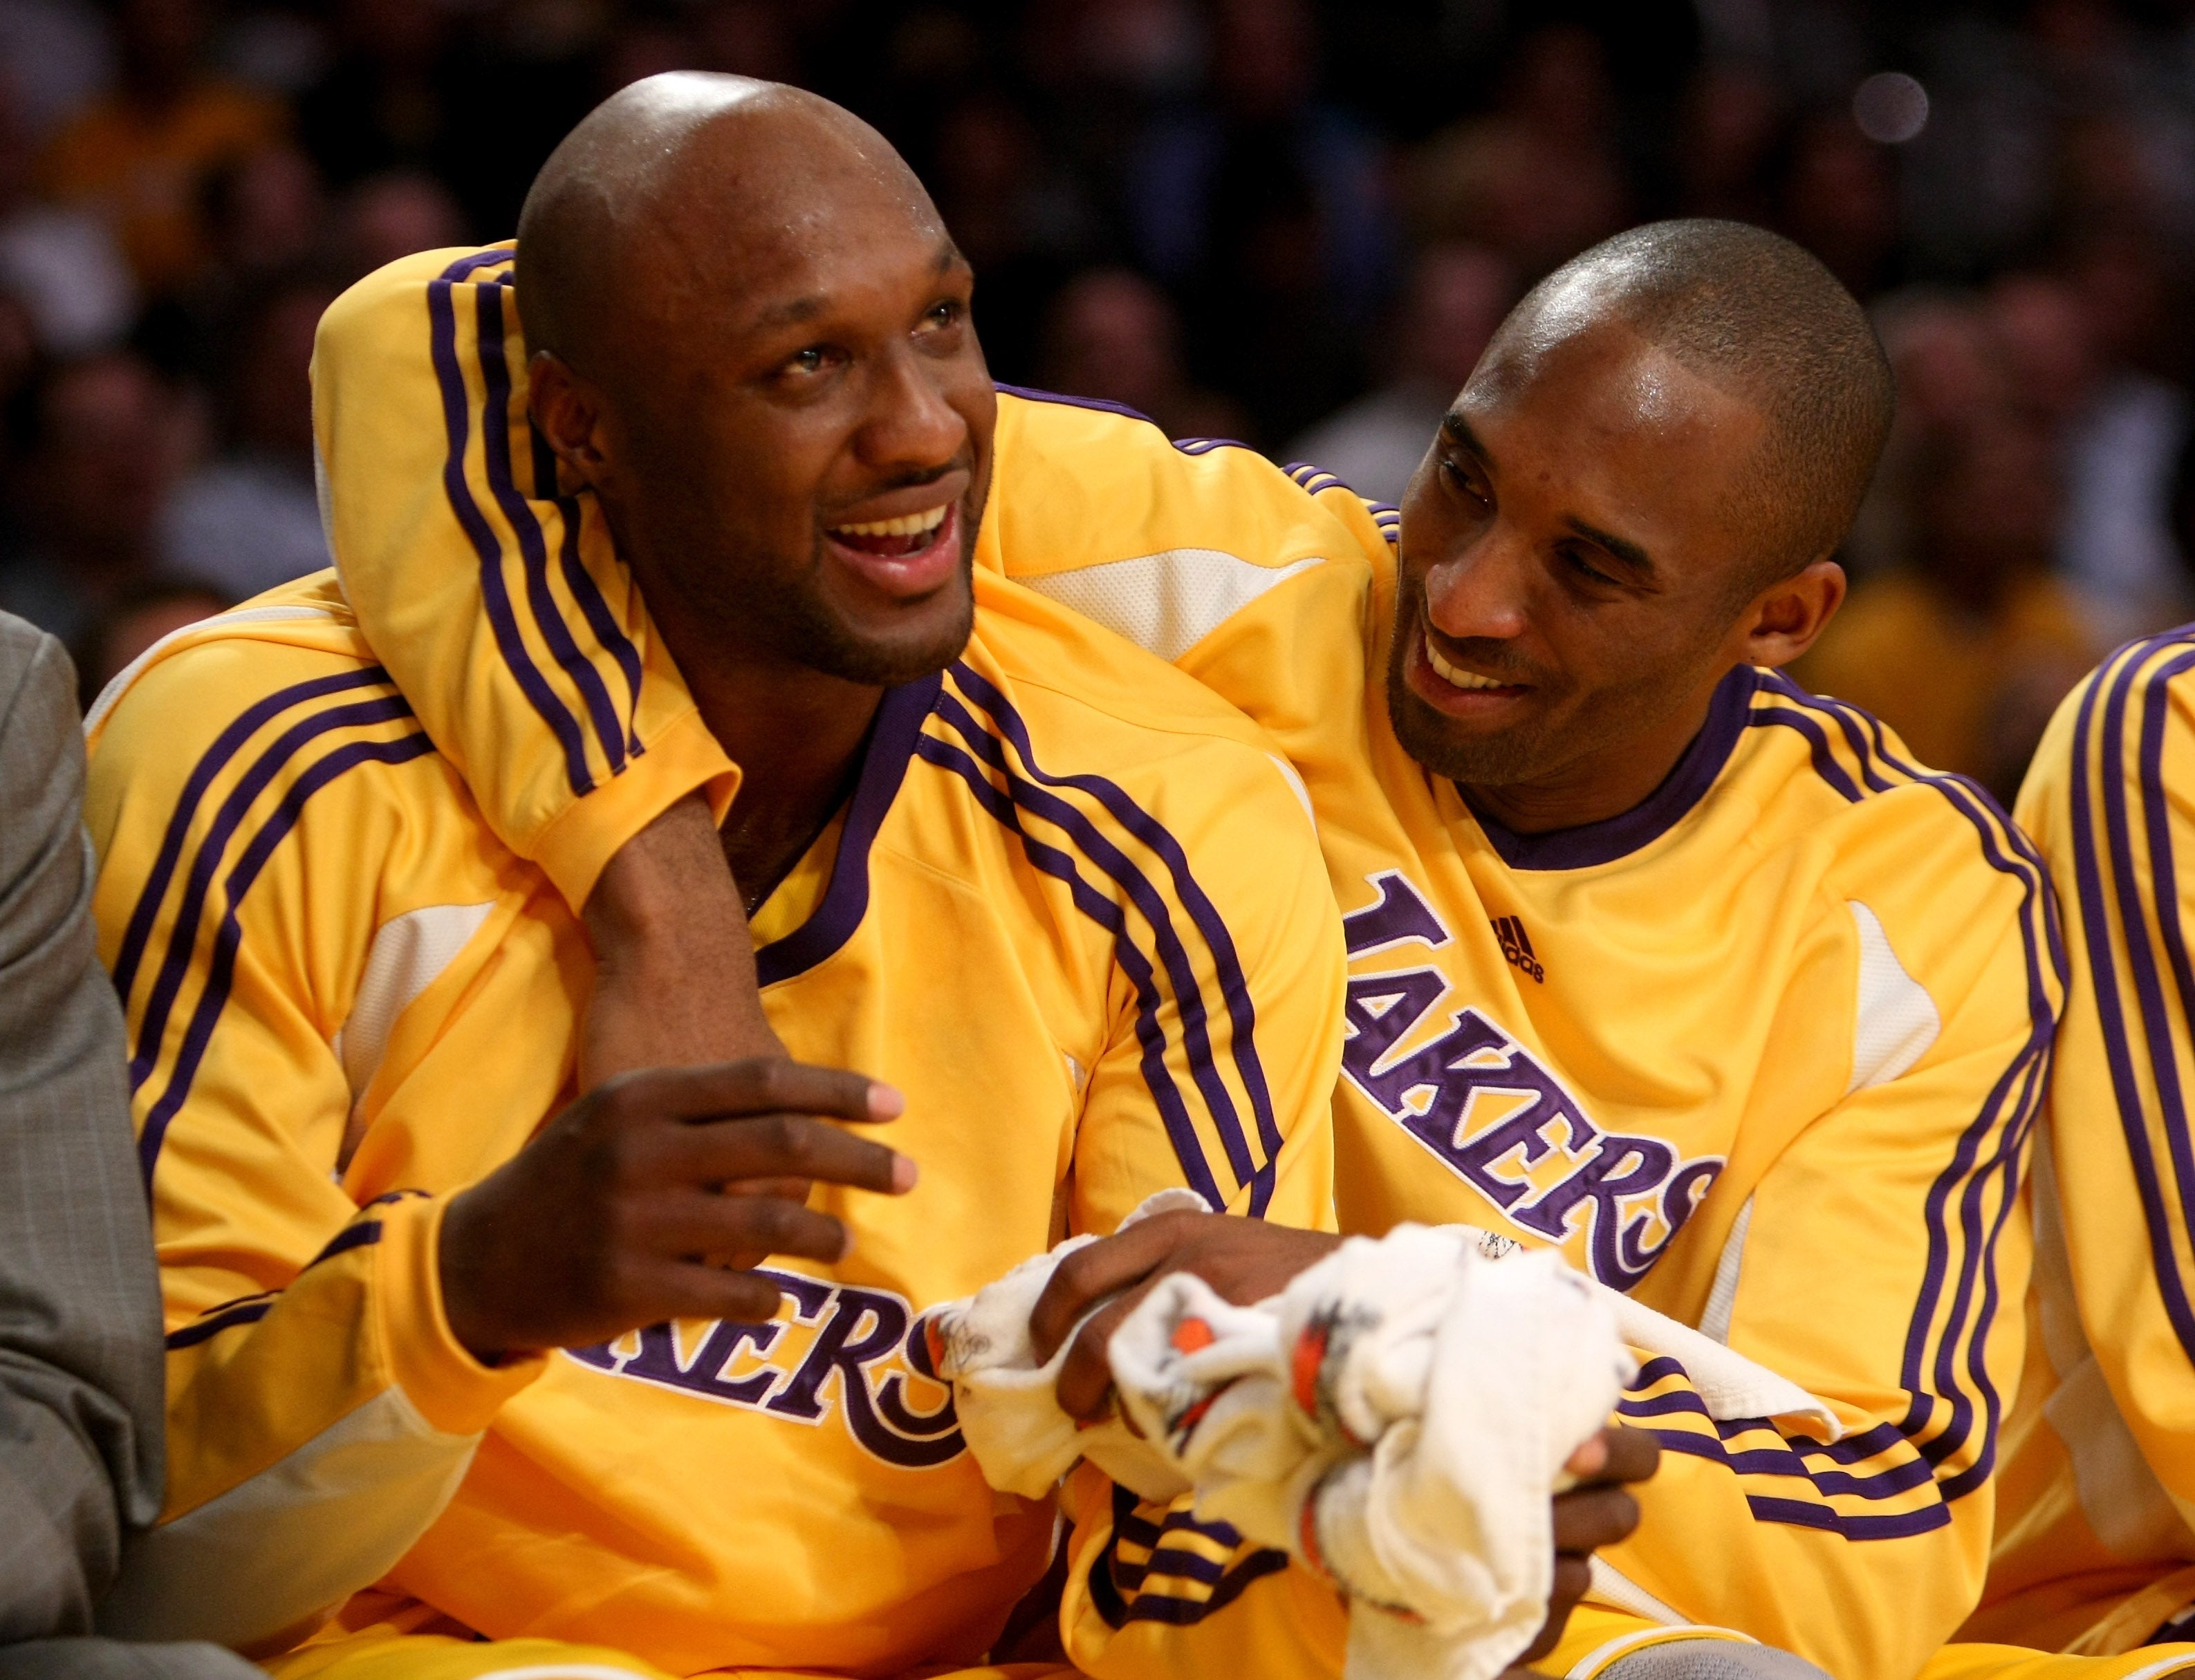 Official Los Angeles Lakers Tupac And Lebron Kobe Bryant Legends